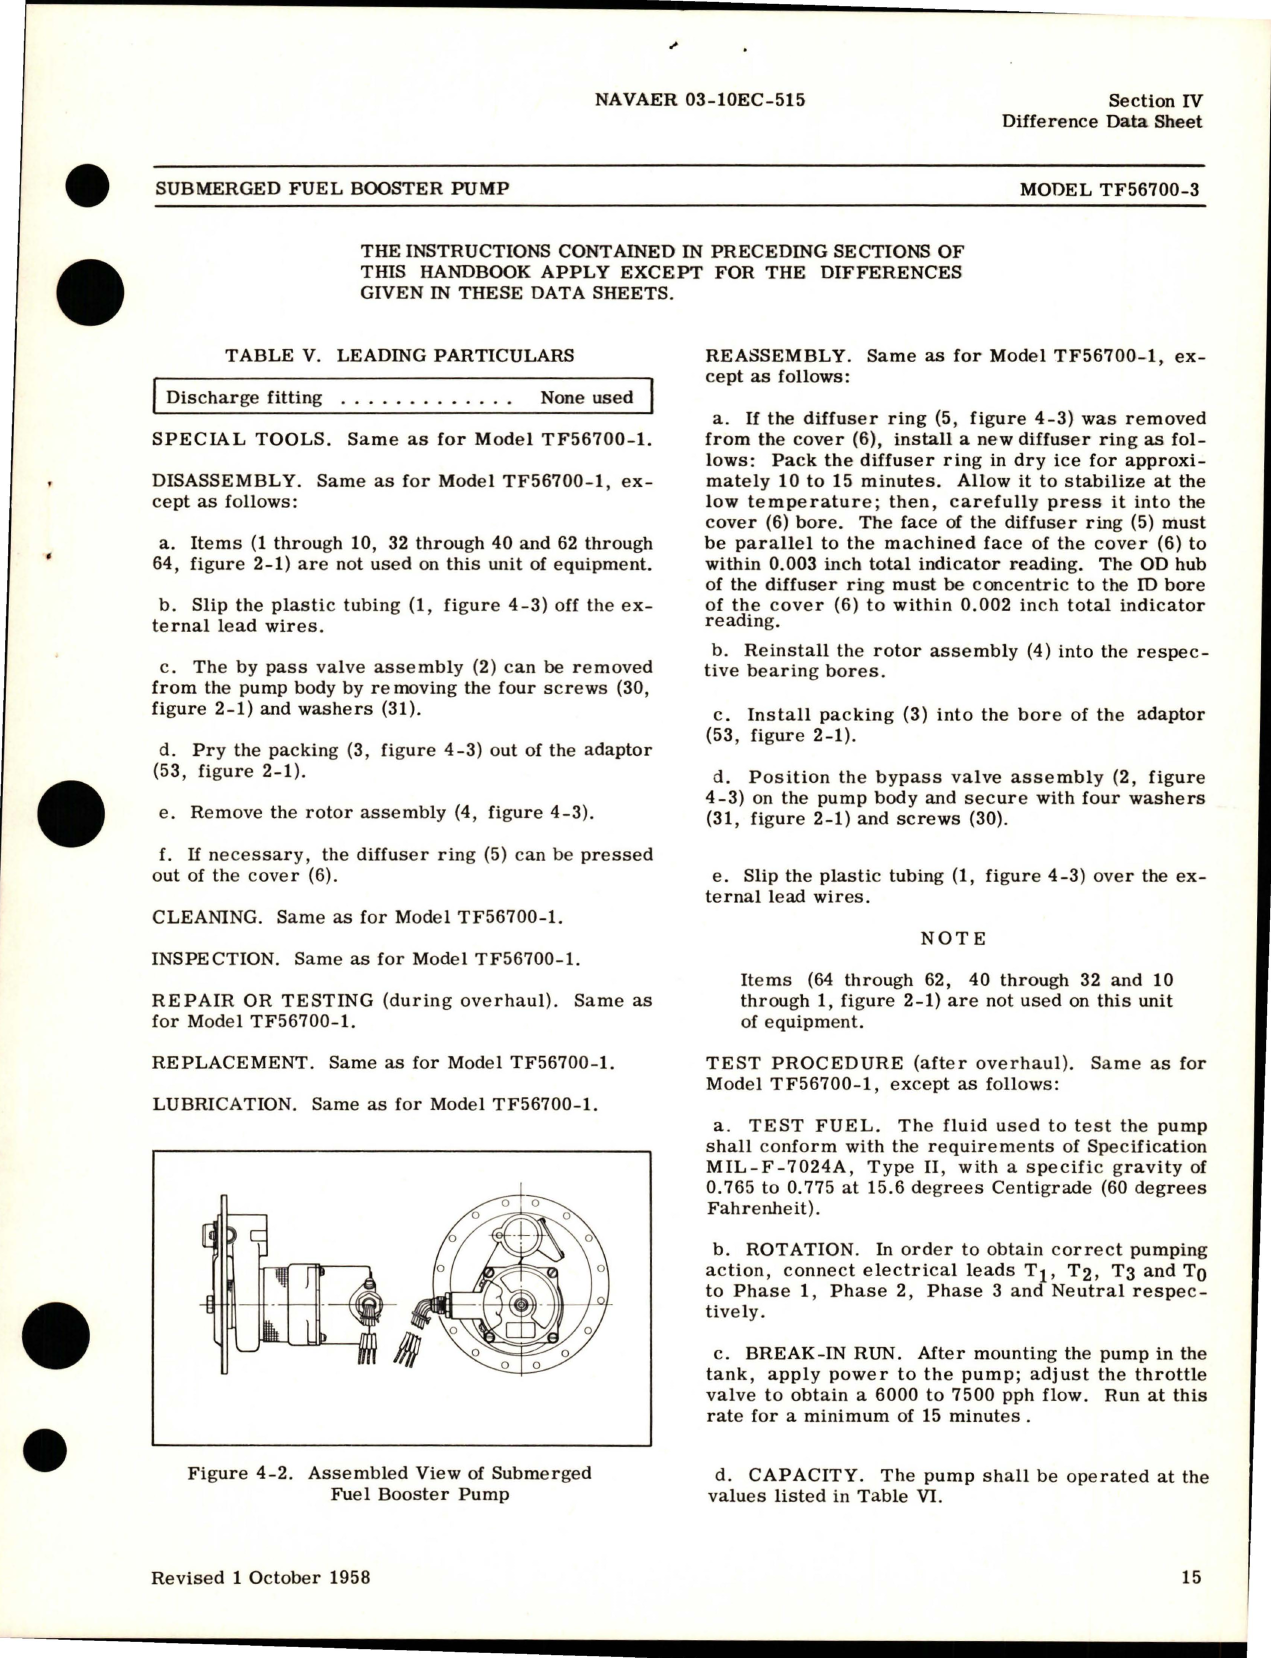 Sample page 7 from AirCorps Library document: Overhaul Instructions for Submerged Fuel Booster Pump